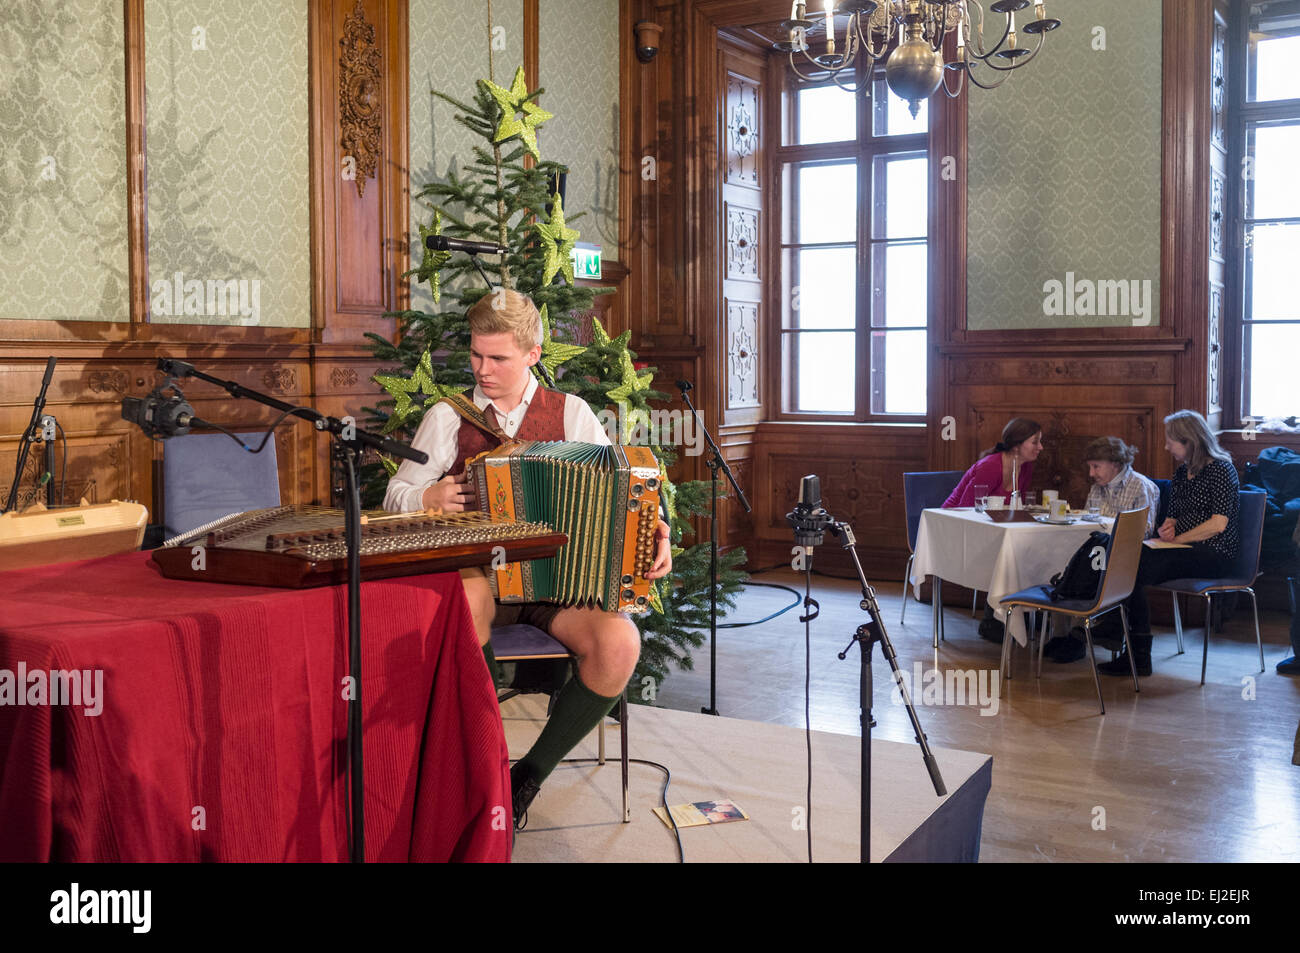 Accordionist in regional costume playing at a cafe at the Adventmarkt in Palais Niederösterreich Vienna, Austria Stock Photo